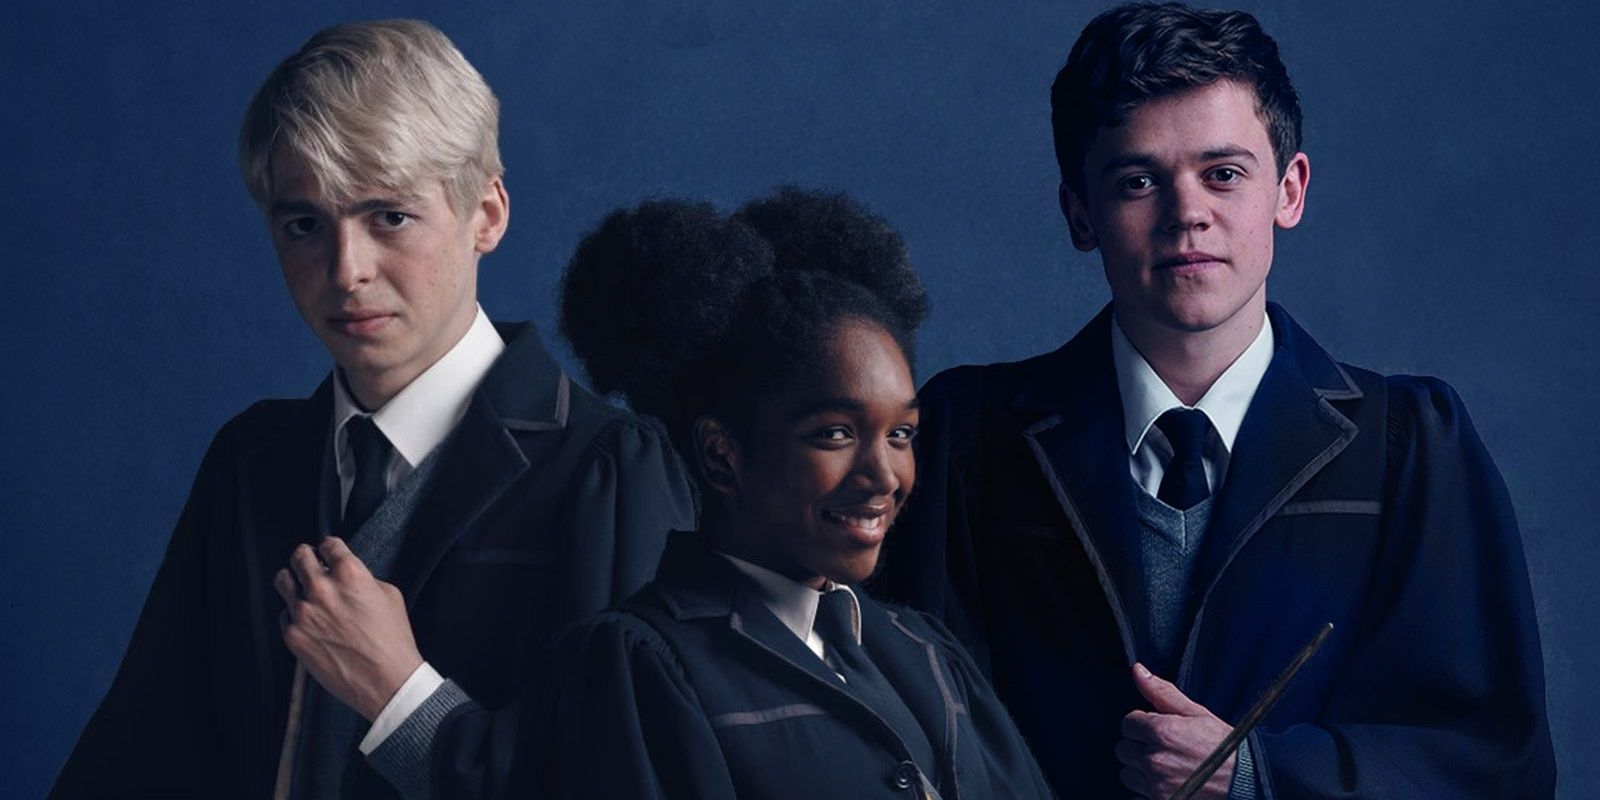 Scorpius Albus and Rose in Harry potter Cursed Child e1543256668670 Cropped